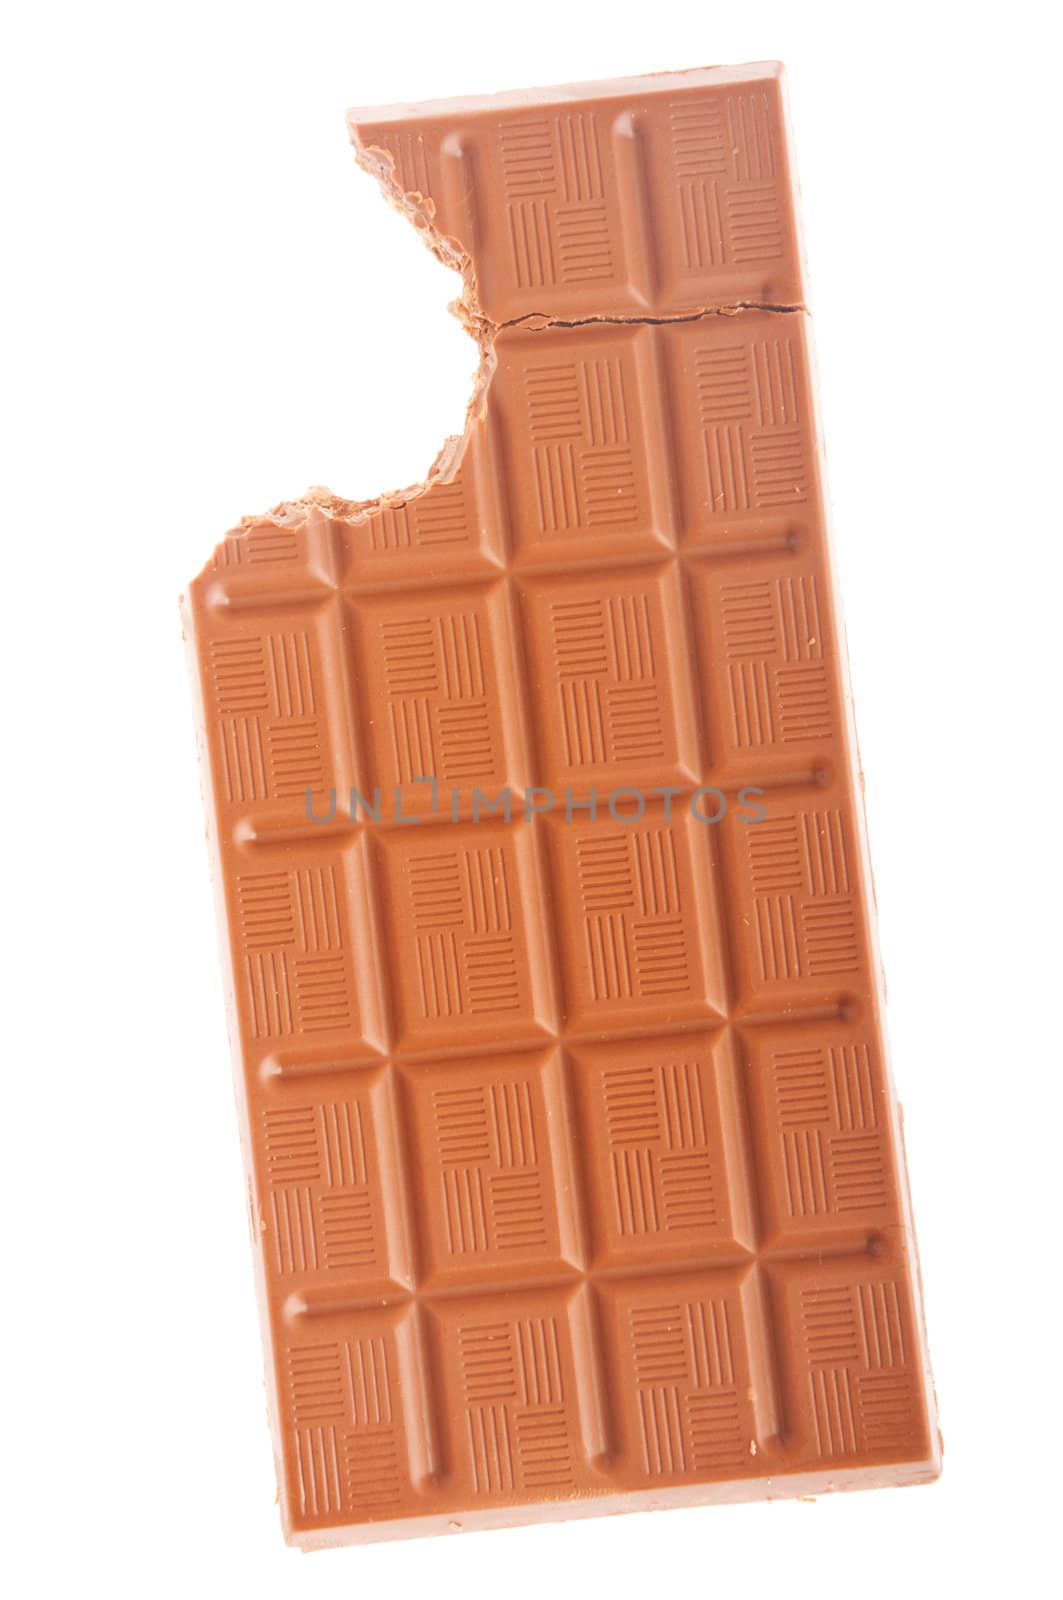 crispy rice chocolate bar with bite isolated on white background